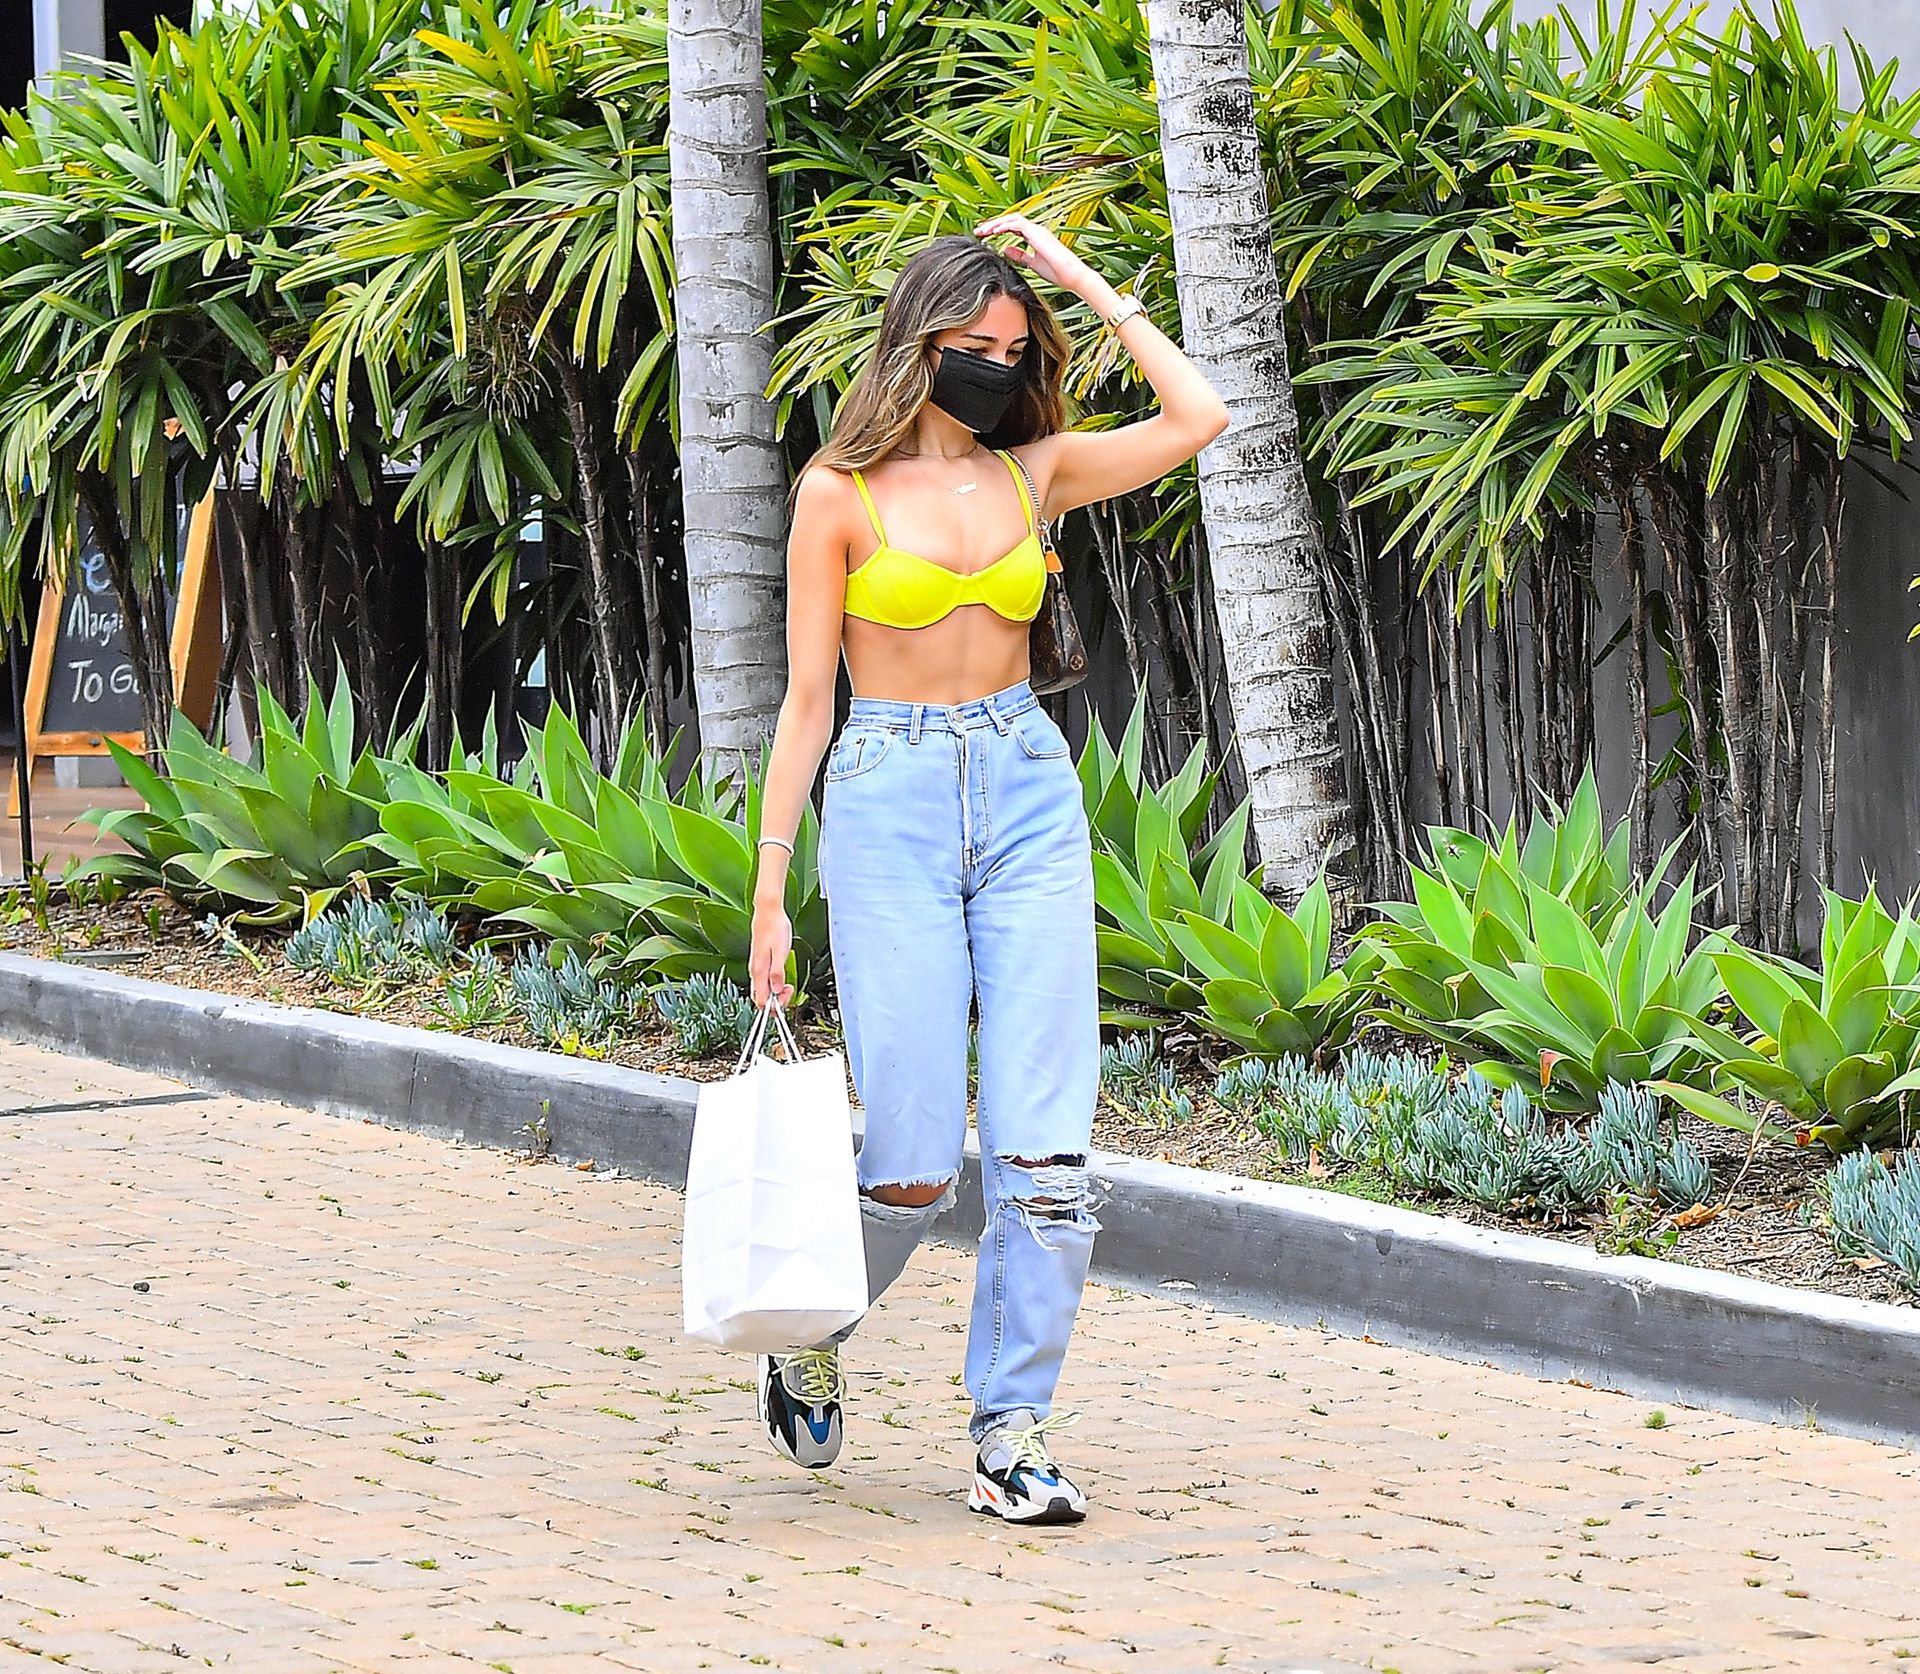 Madison Beer Stuns in a Yellow Bra at Cafe Havana in Malibu (29 Sexy Photos)